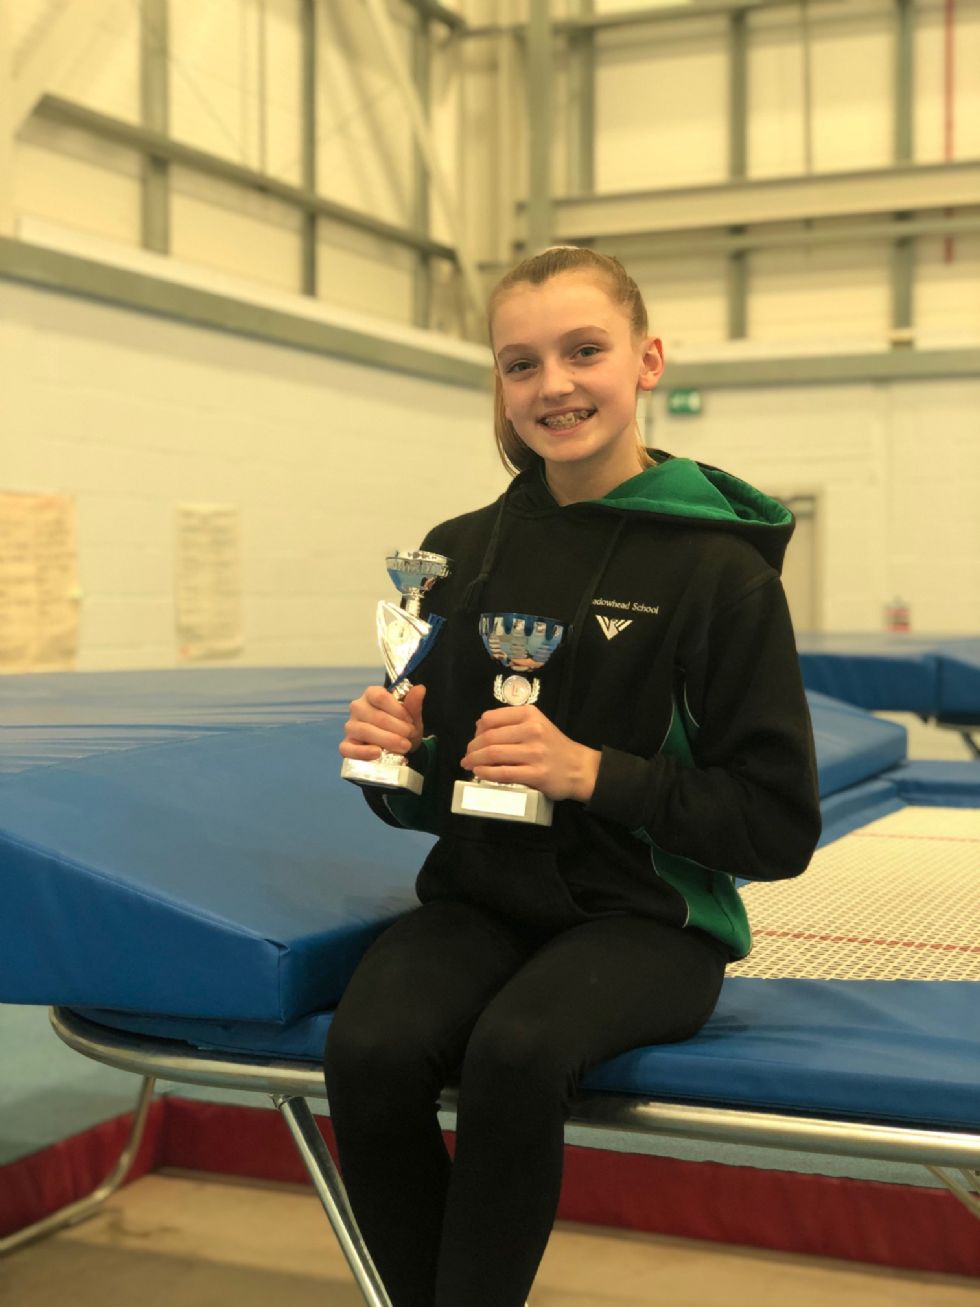  trampolinist trophies